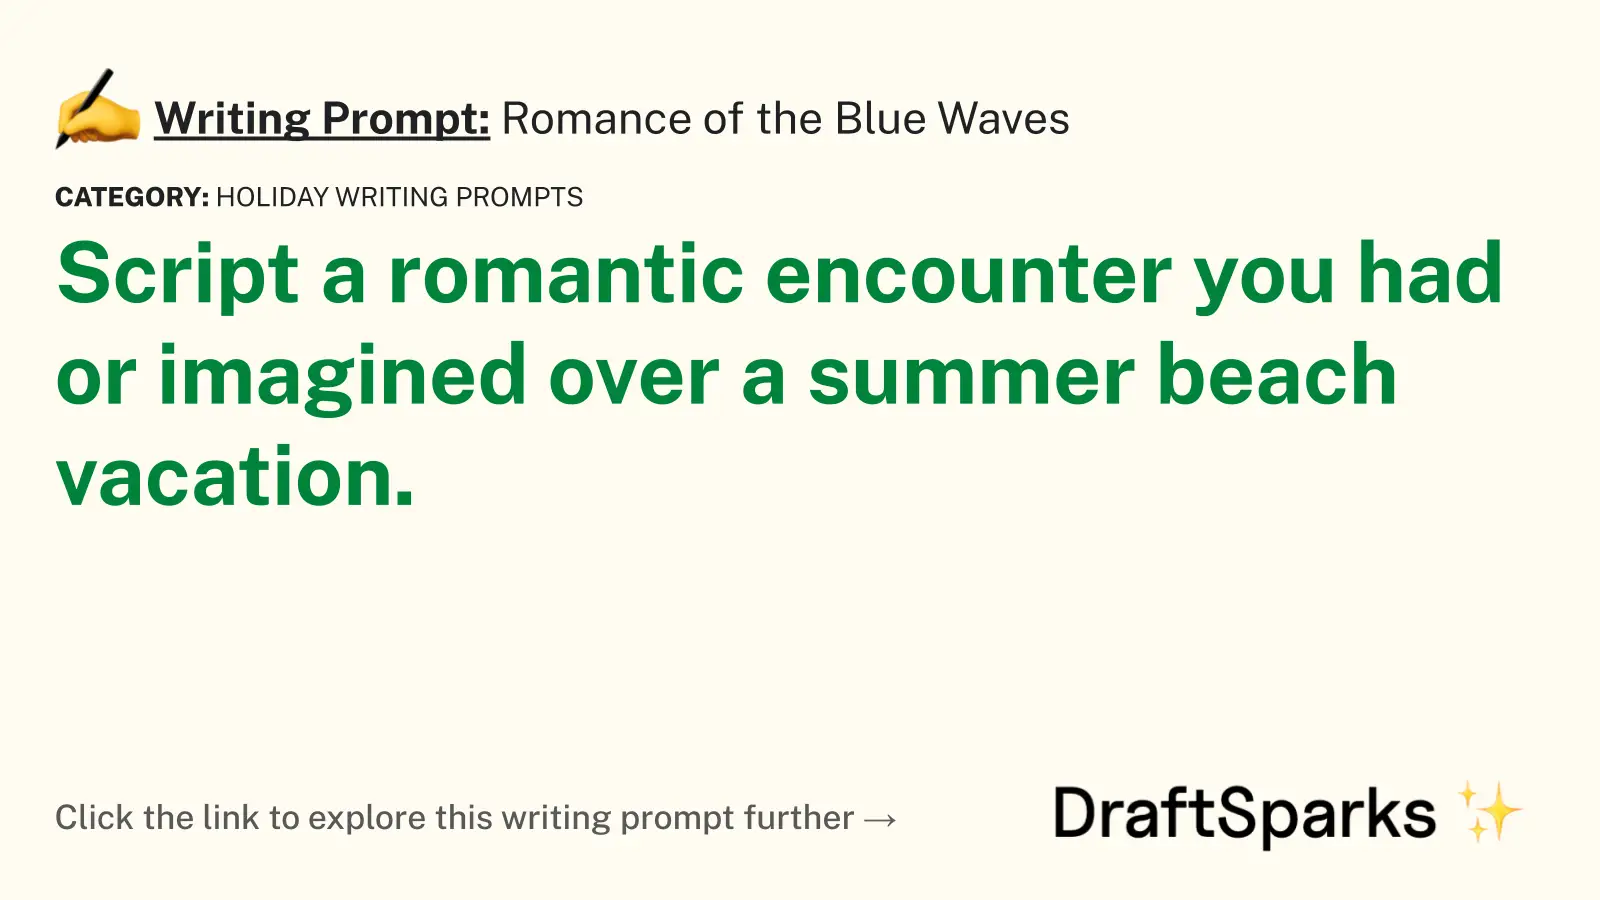 Romance of the Blue Waves